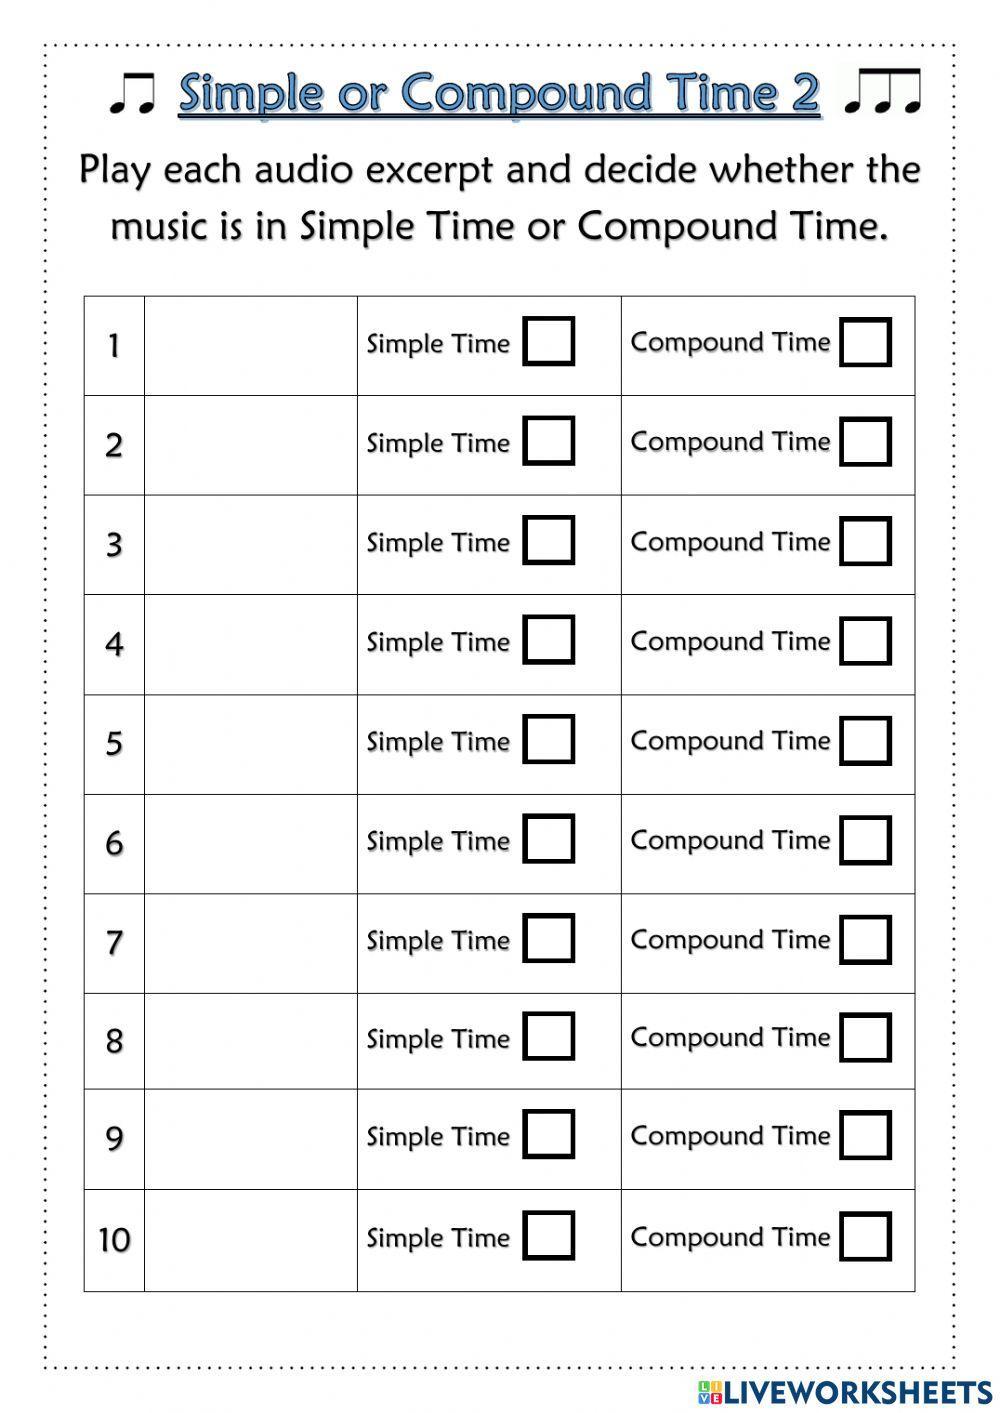 Music - Simple or Compound Time 2